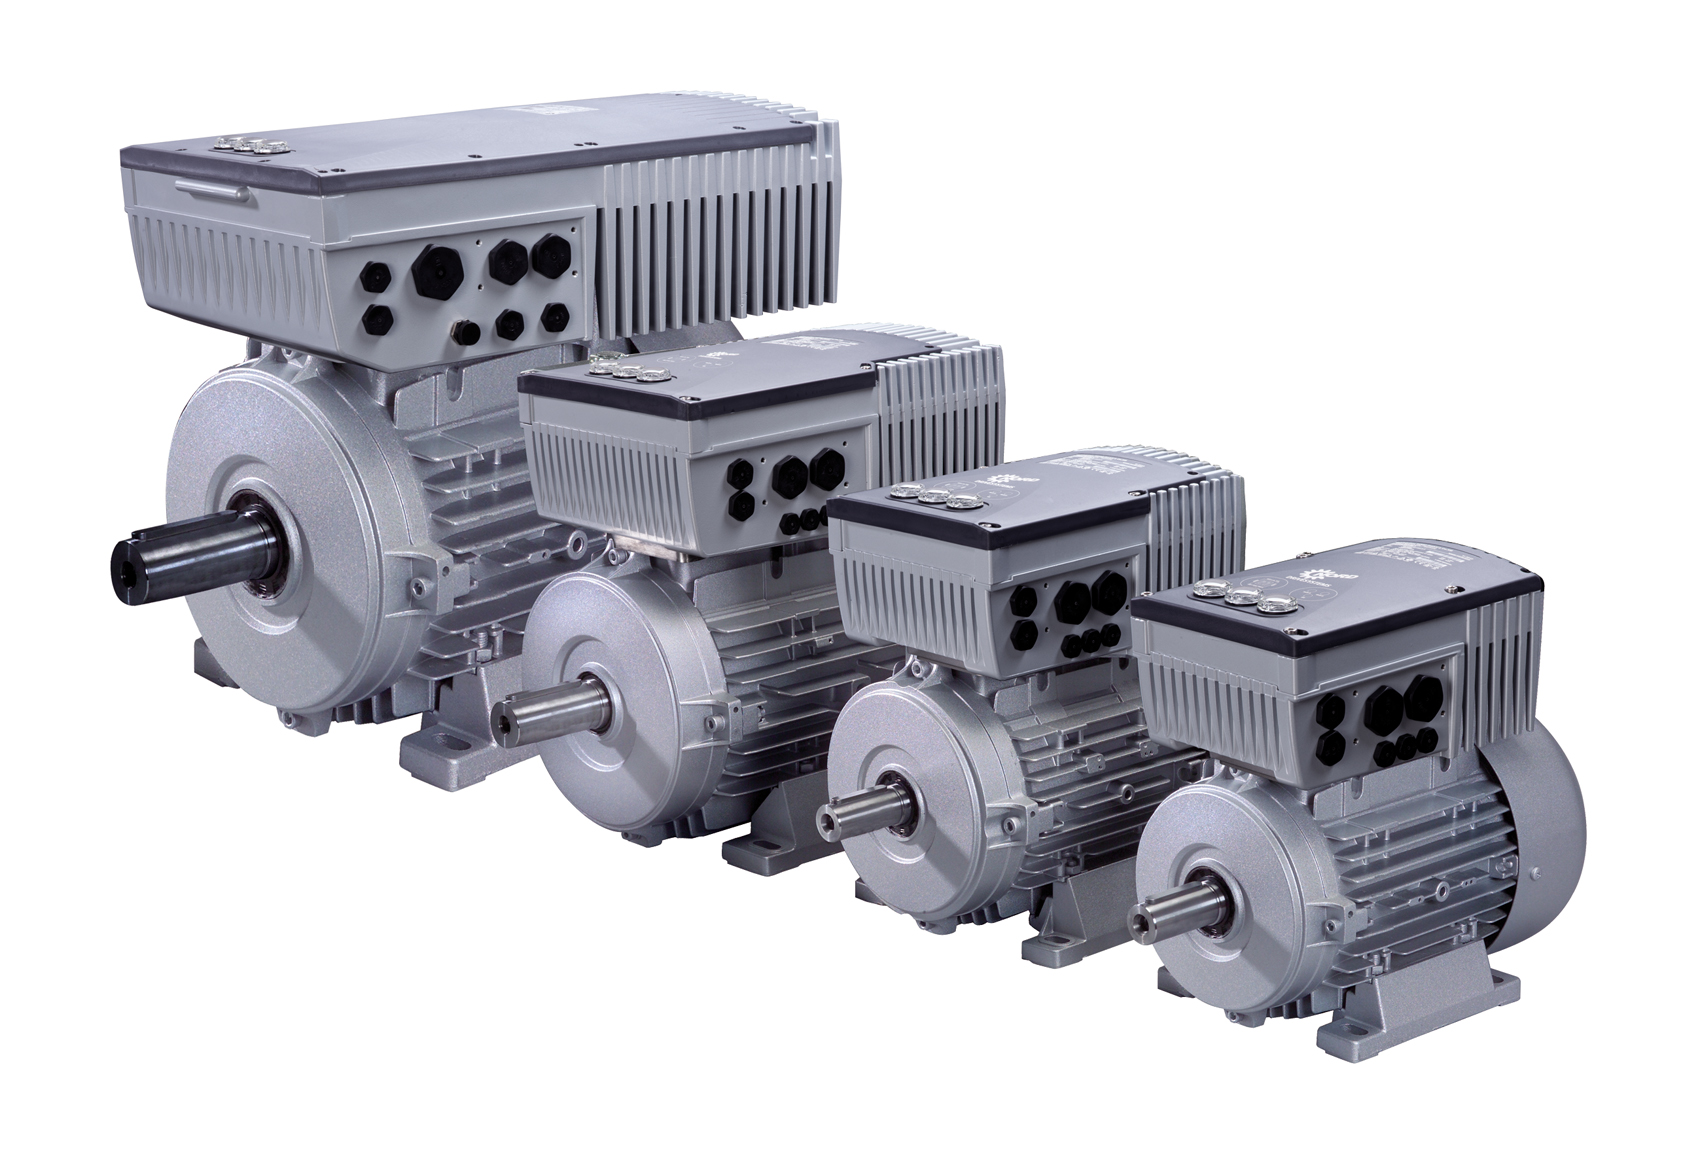 Gearmotors, frequency inverters, drive automation